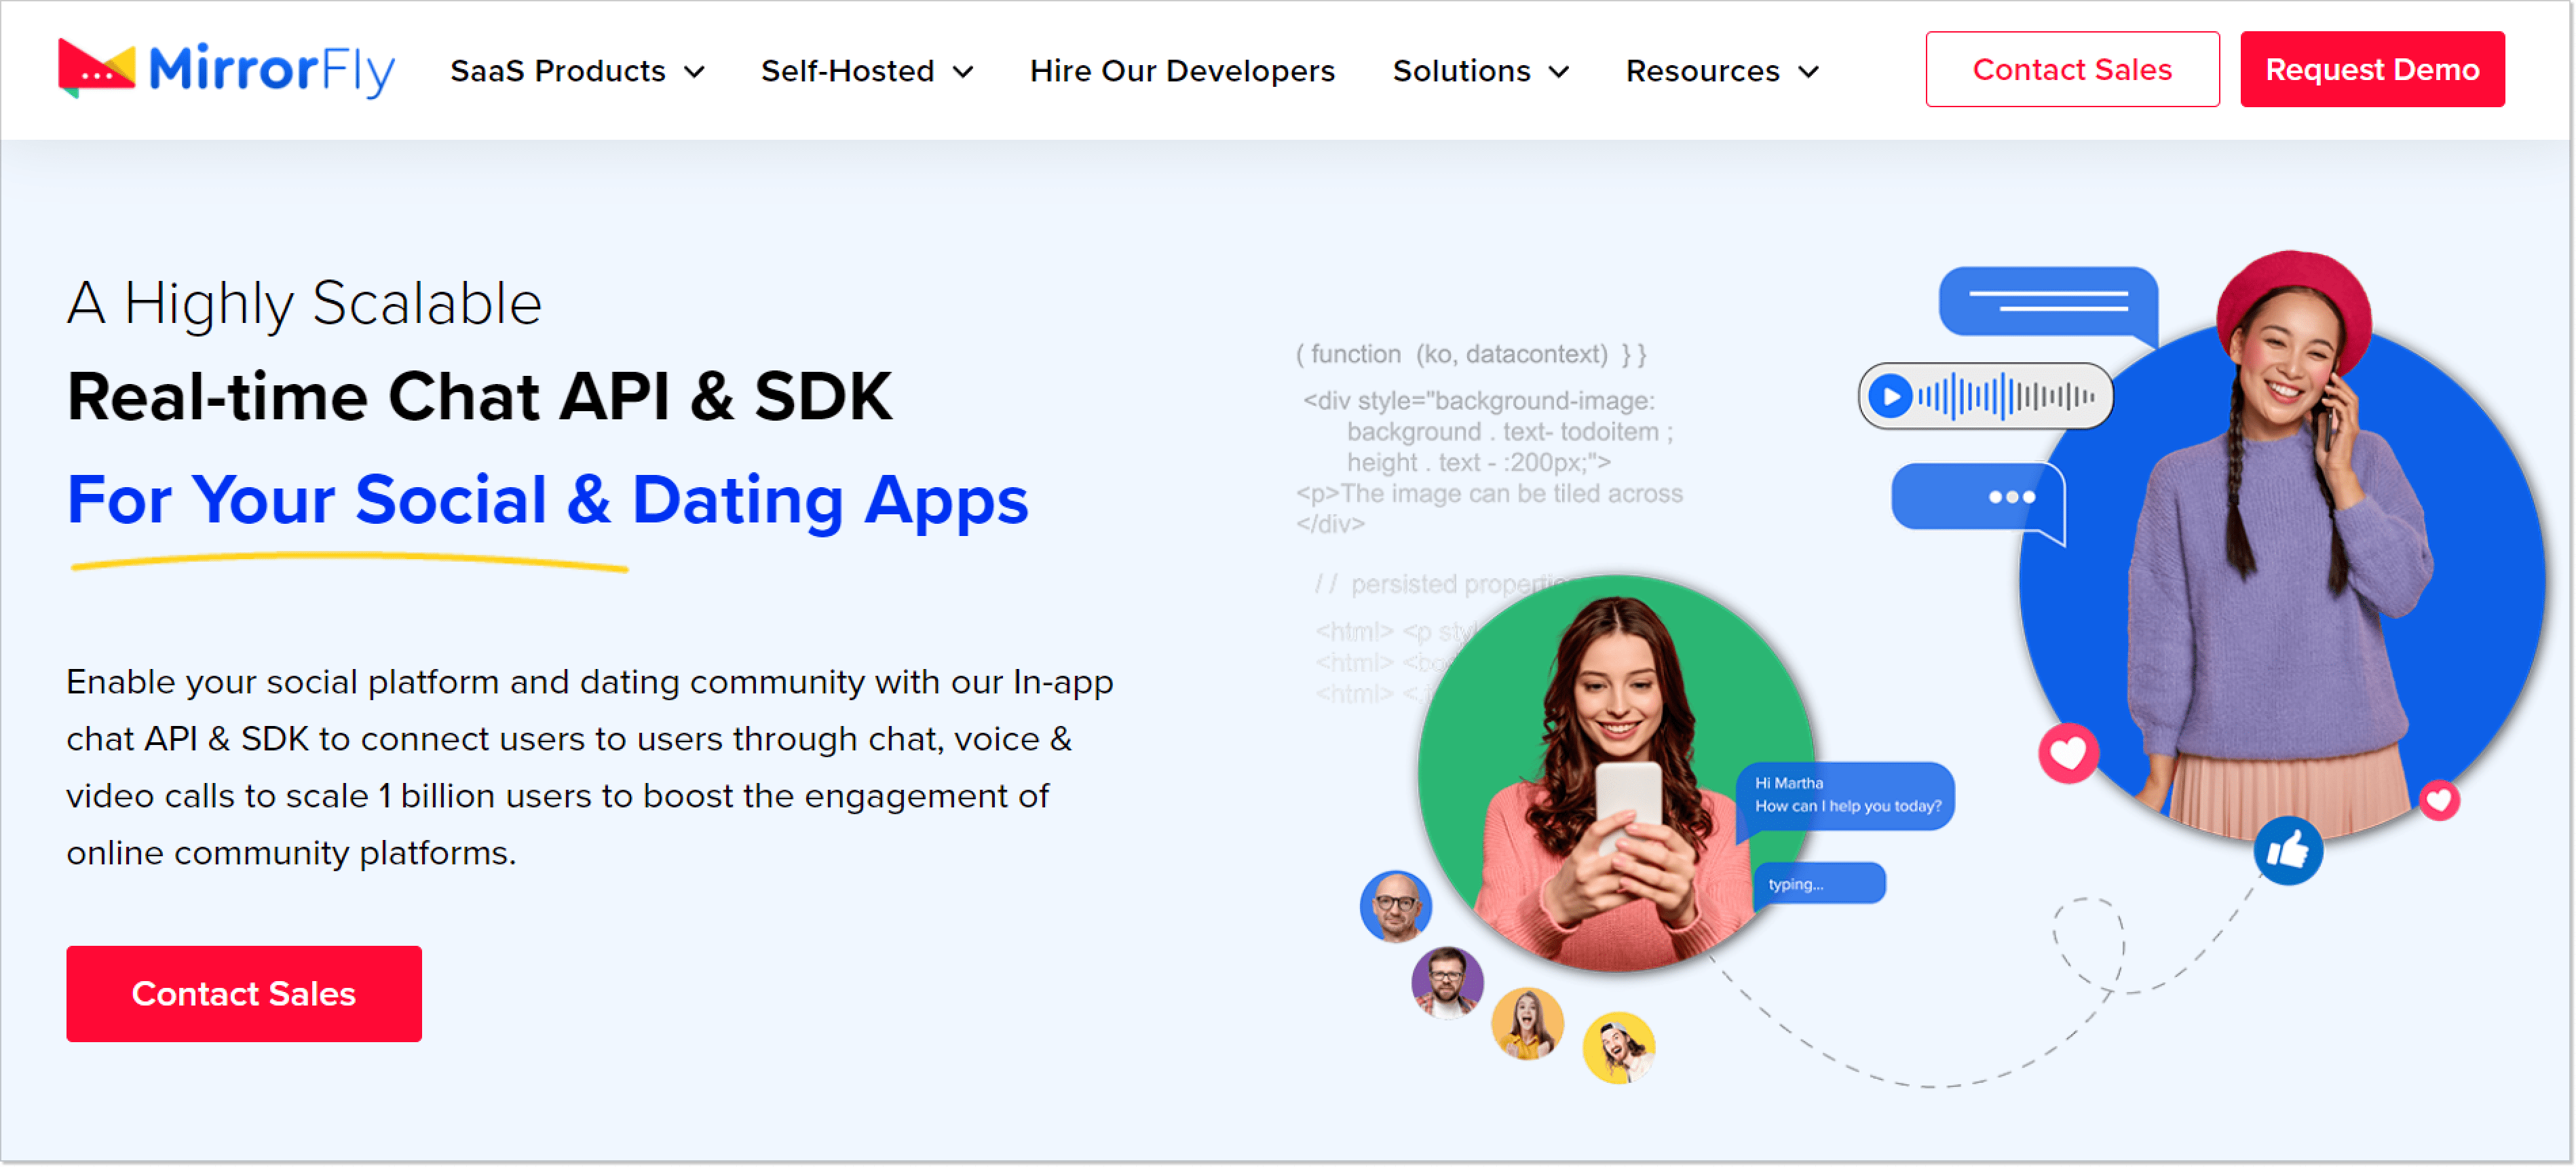 Lending page of a MirrorFly APIs product